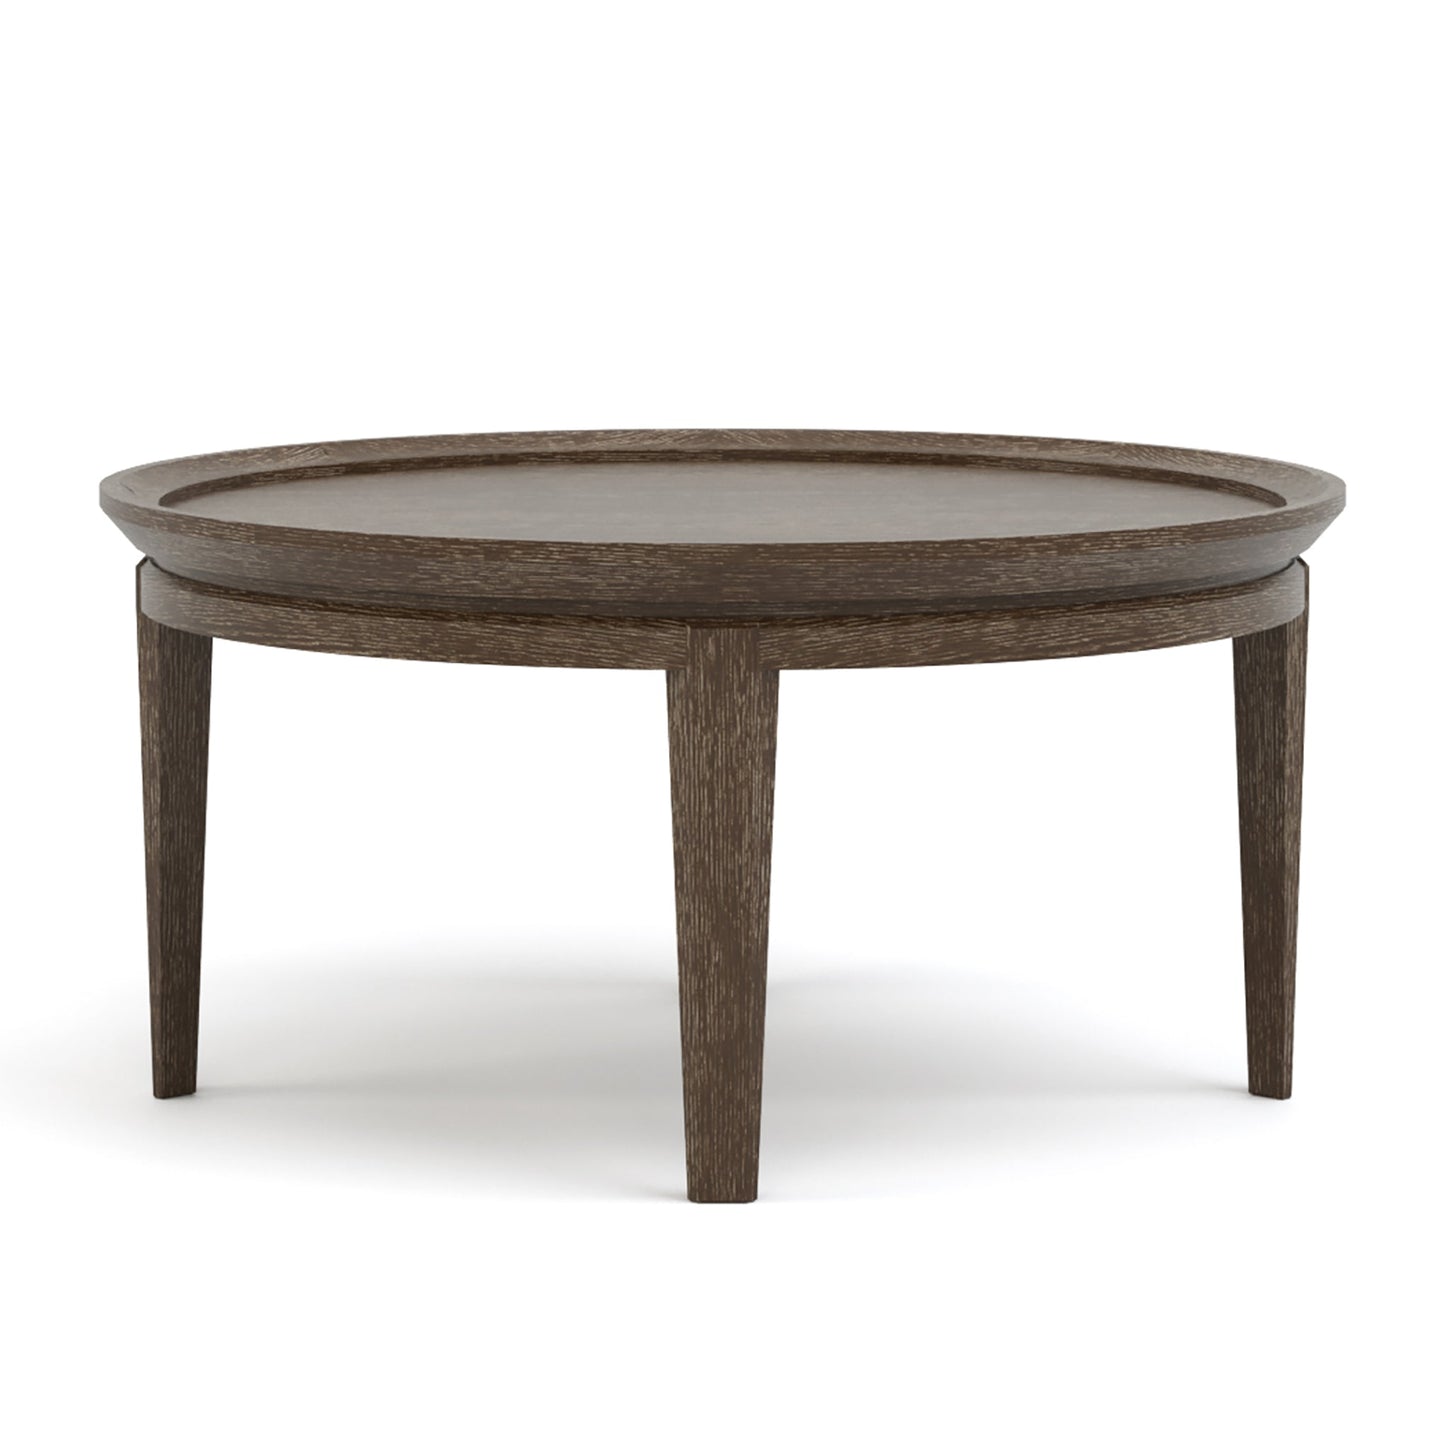 Maidstone 36-inch Round Cocktail Table in 202 Pier finish